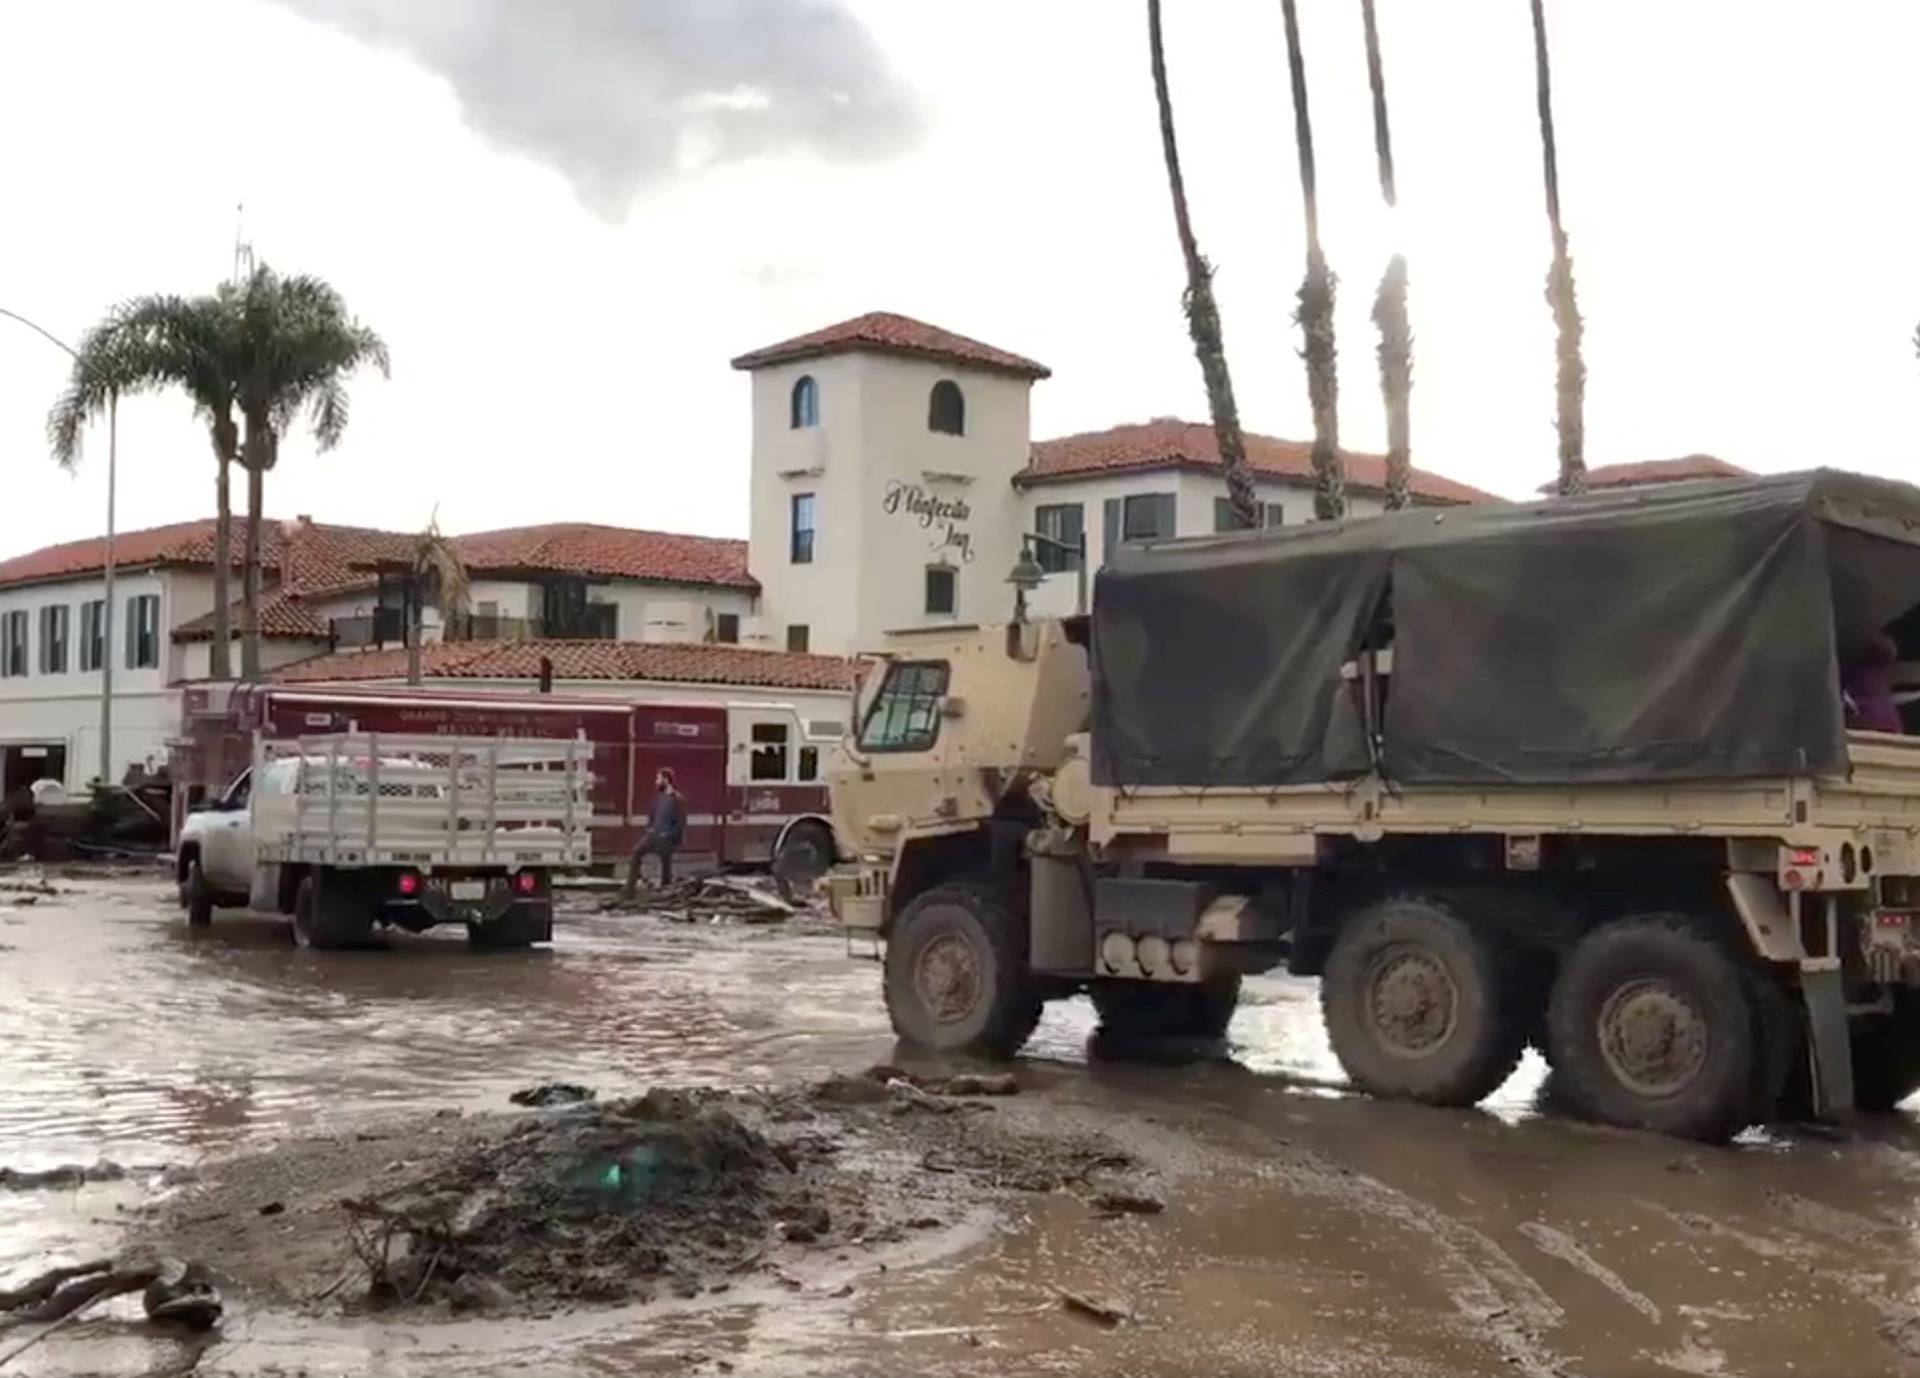 Military vehicles arrive to assist evacuation operations at an area damaged by mudslides in Montecito, California, U.S.